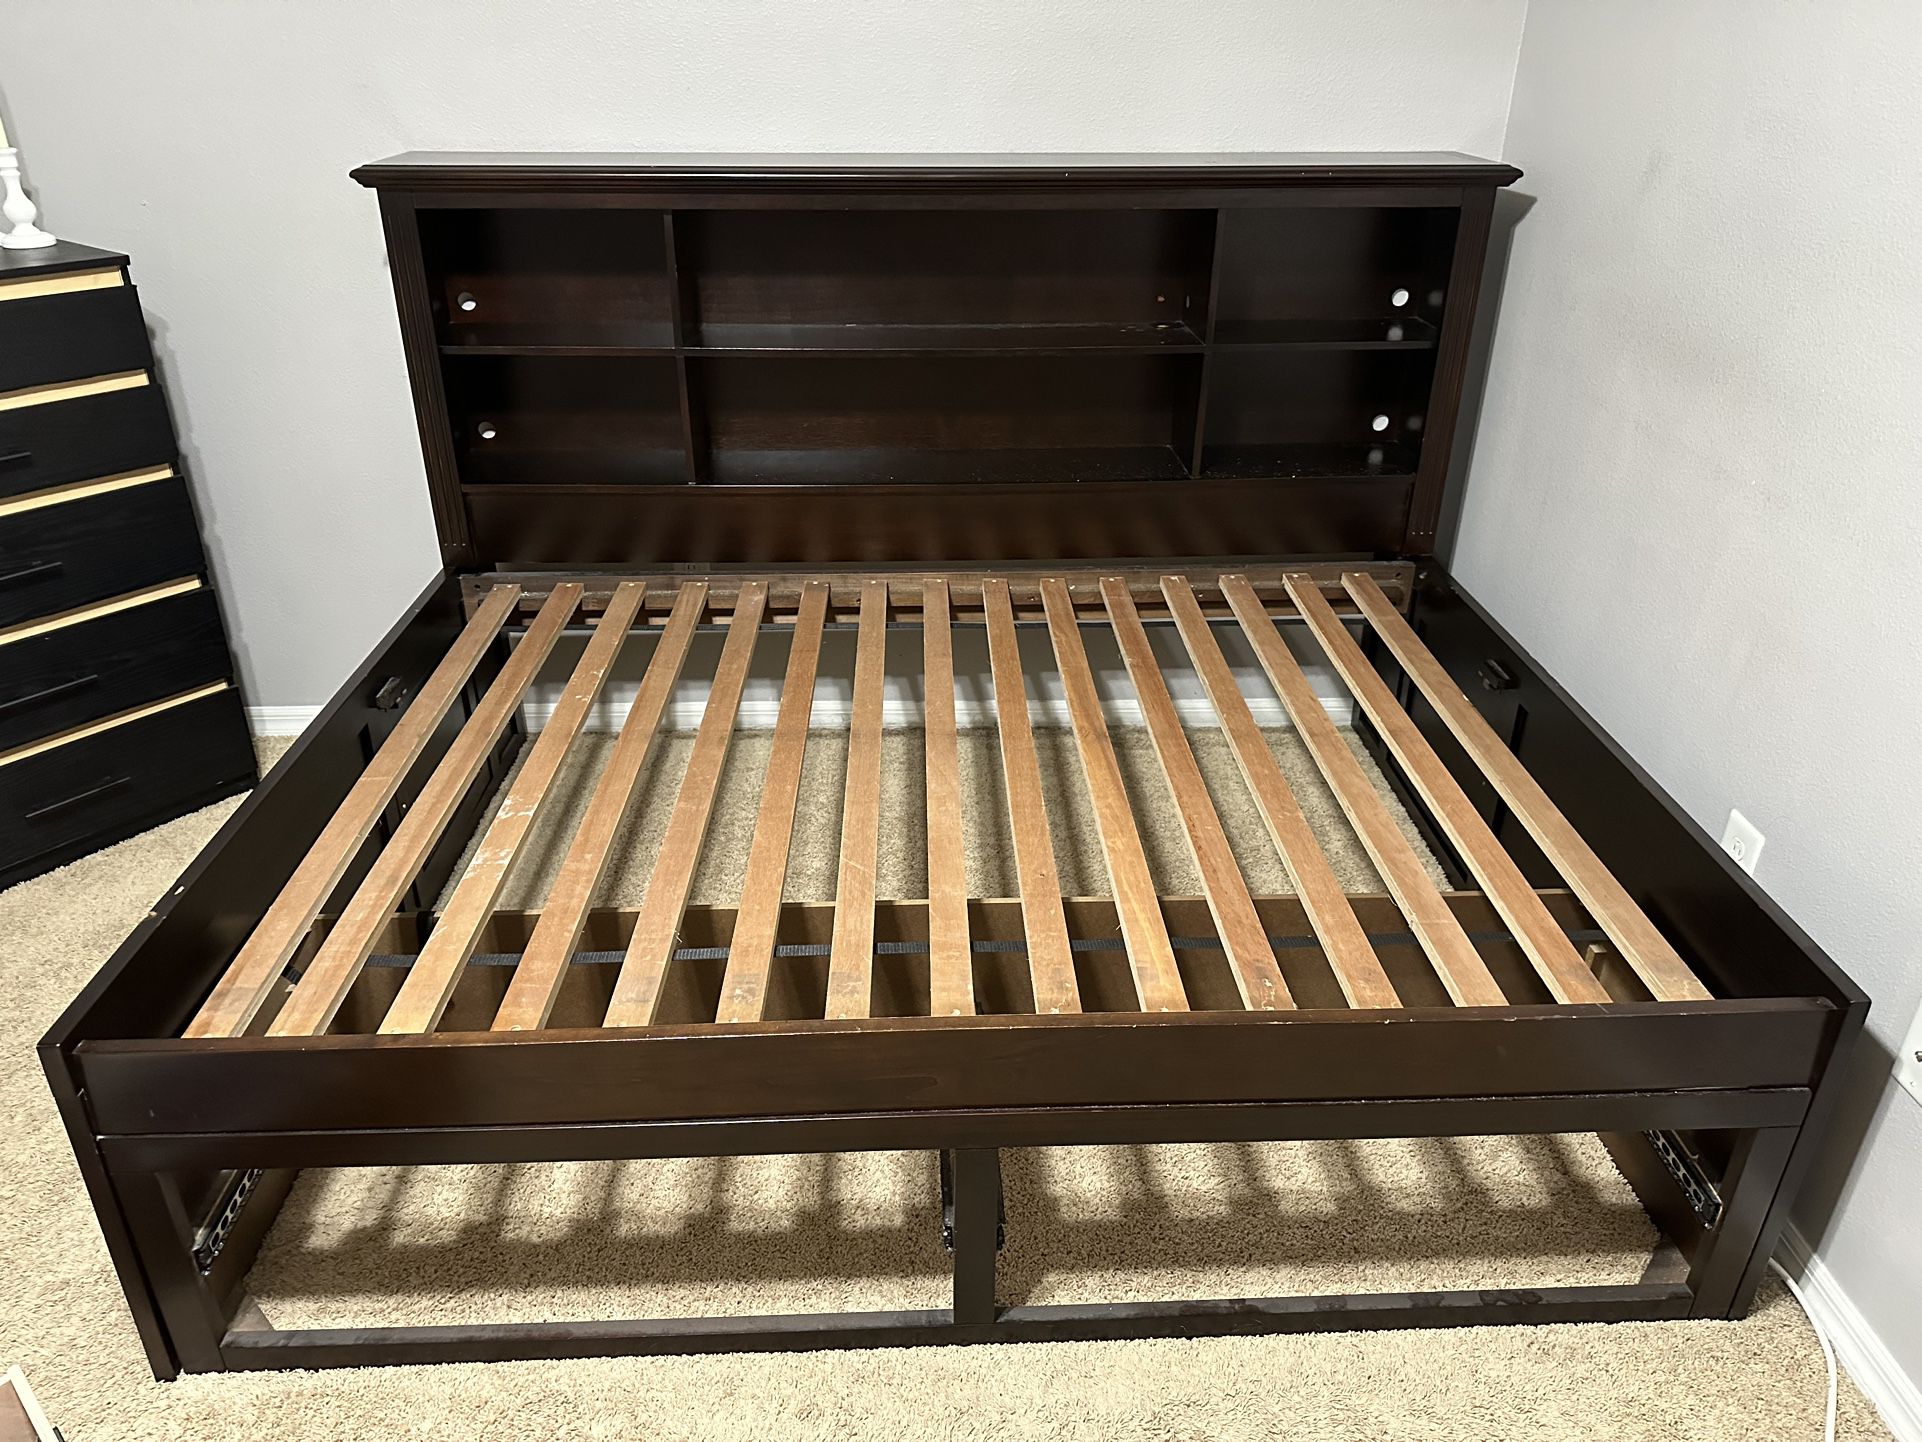 Bed Frame with Side Storage, 2 Drawers, & Doors Leading Underneath the Bed (Full Size)